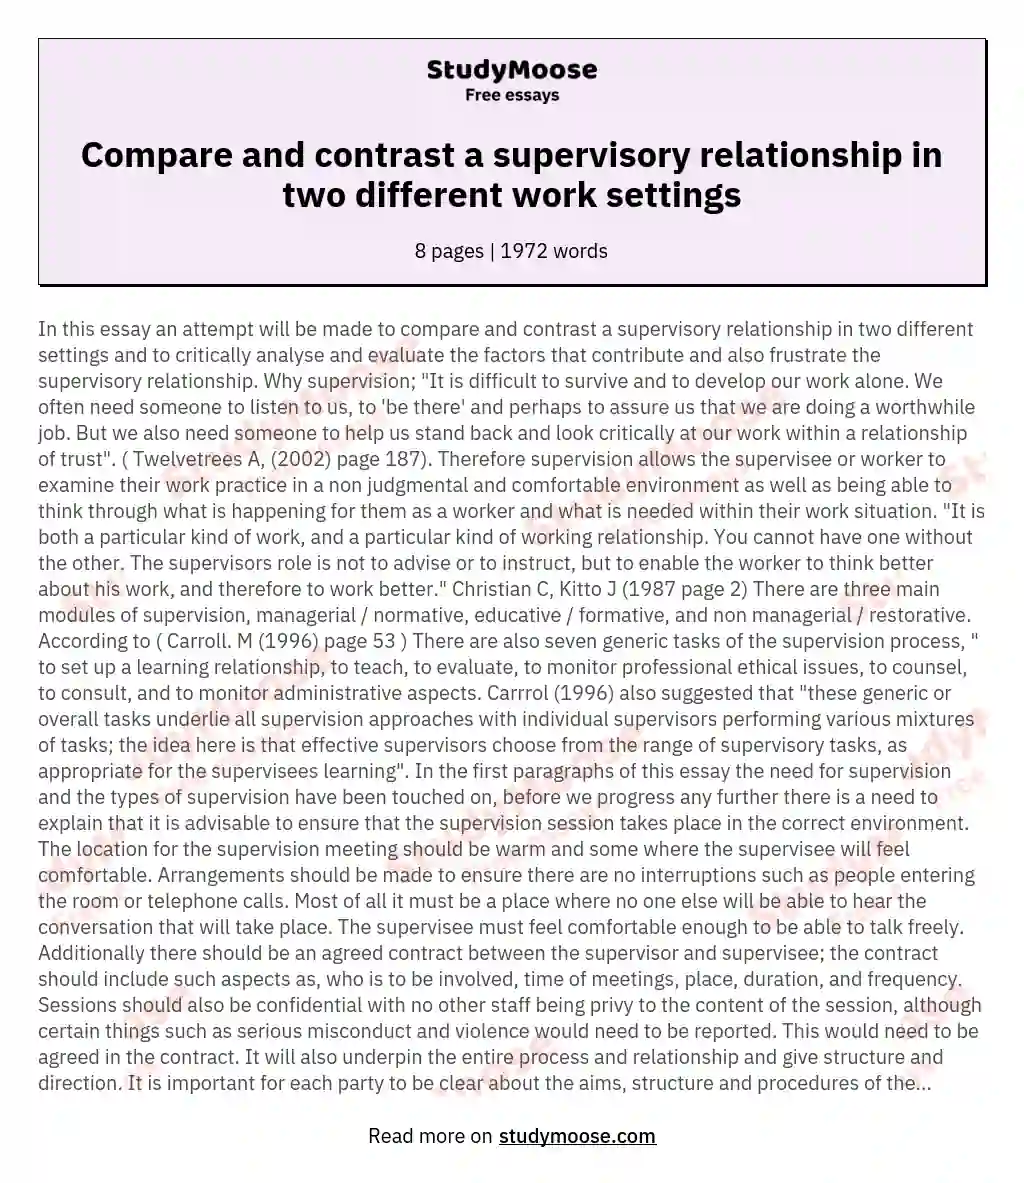 Compare and contrast a supervisory relationship in two different work settings essay